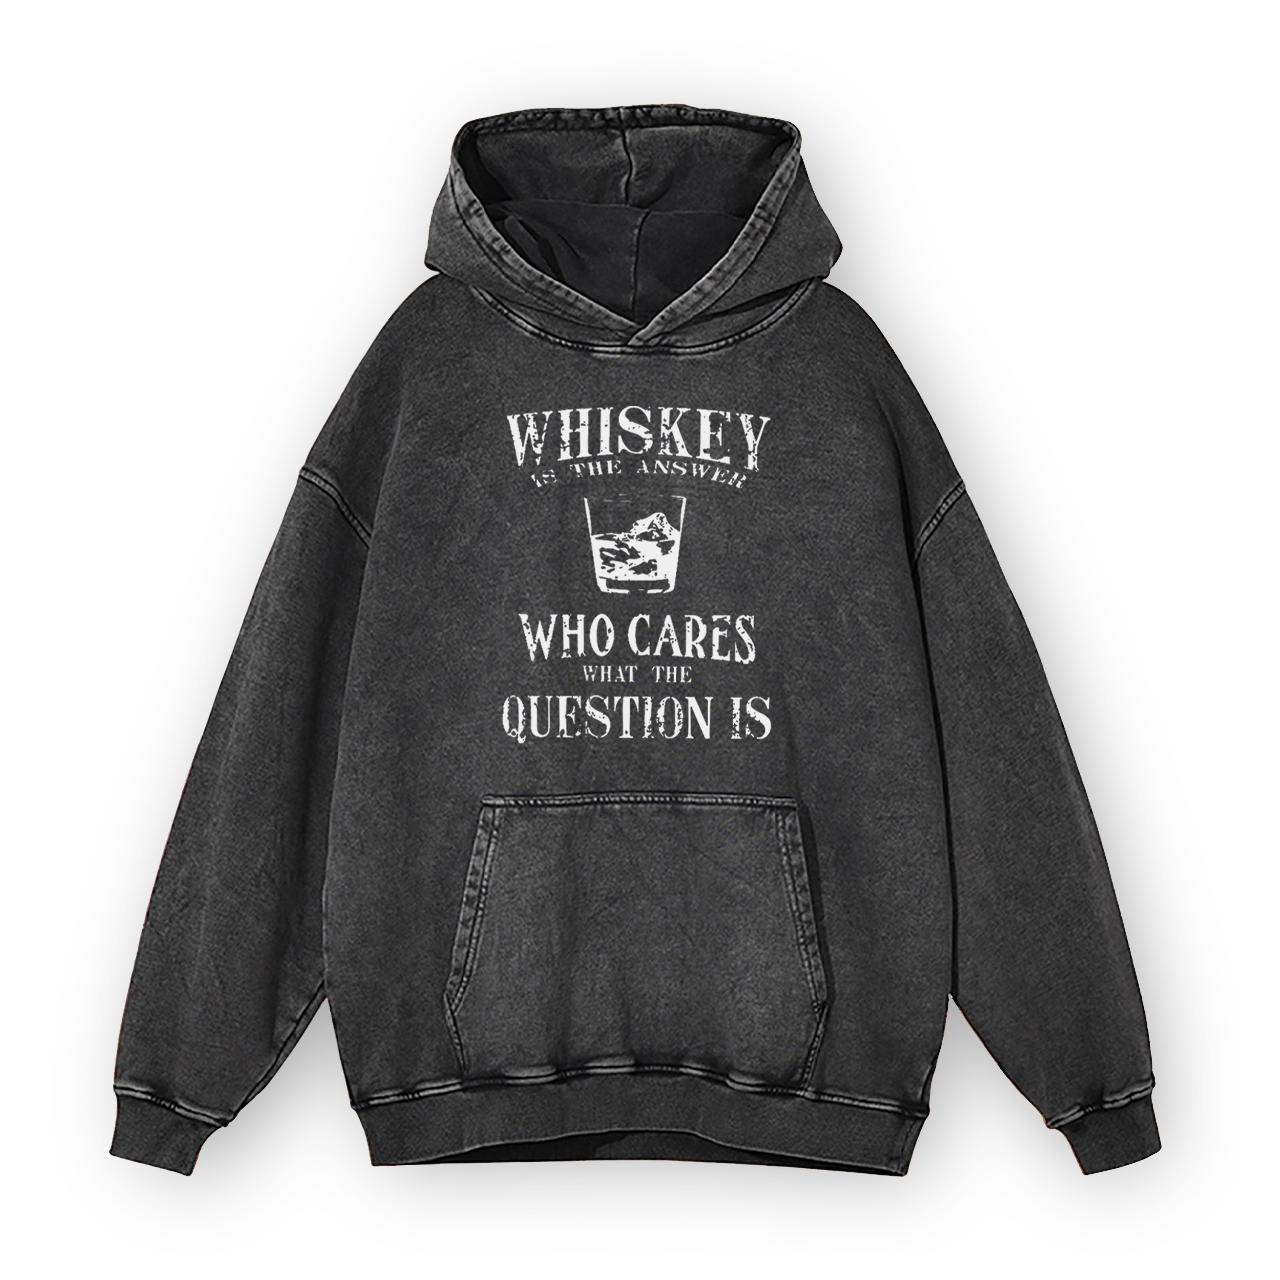 Whiskey is The Answer To Caring Questions Garment-Dye Hoodies